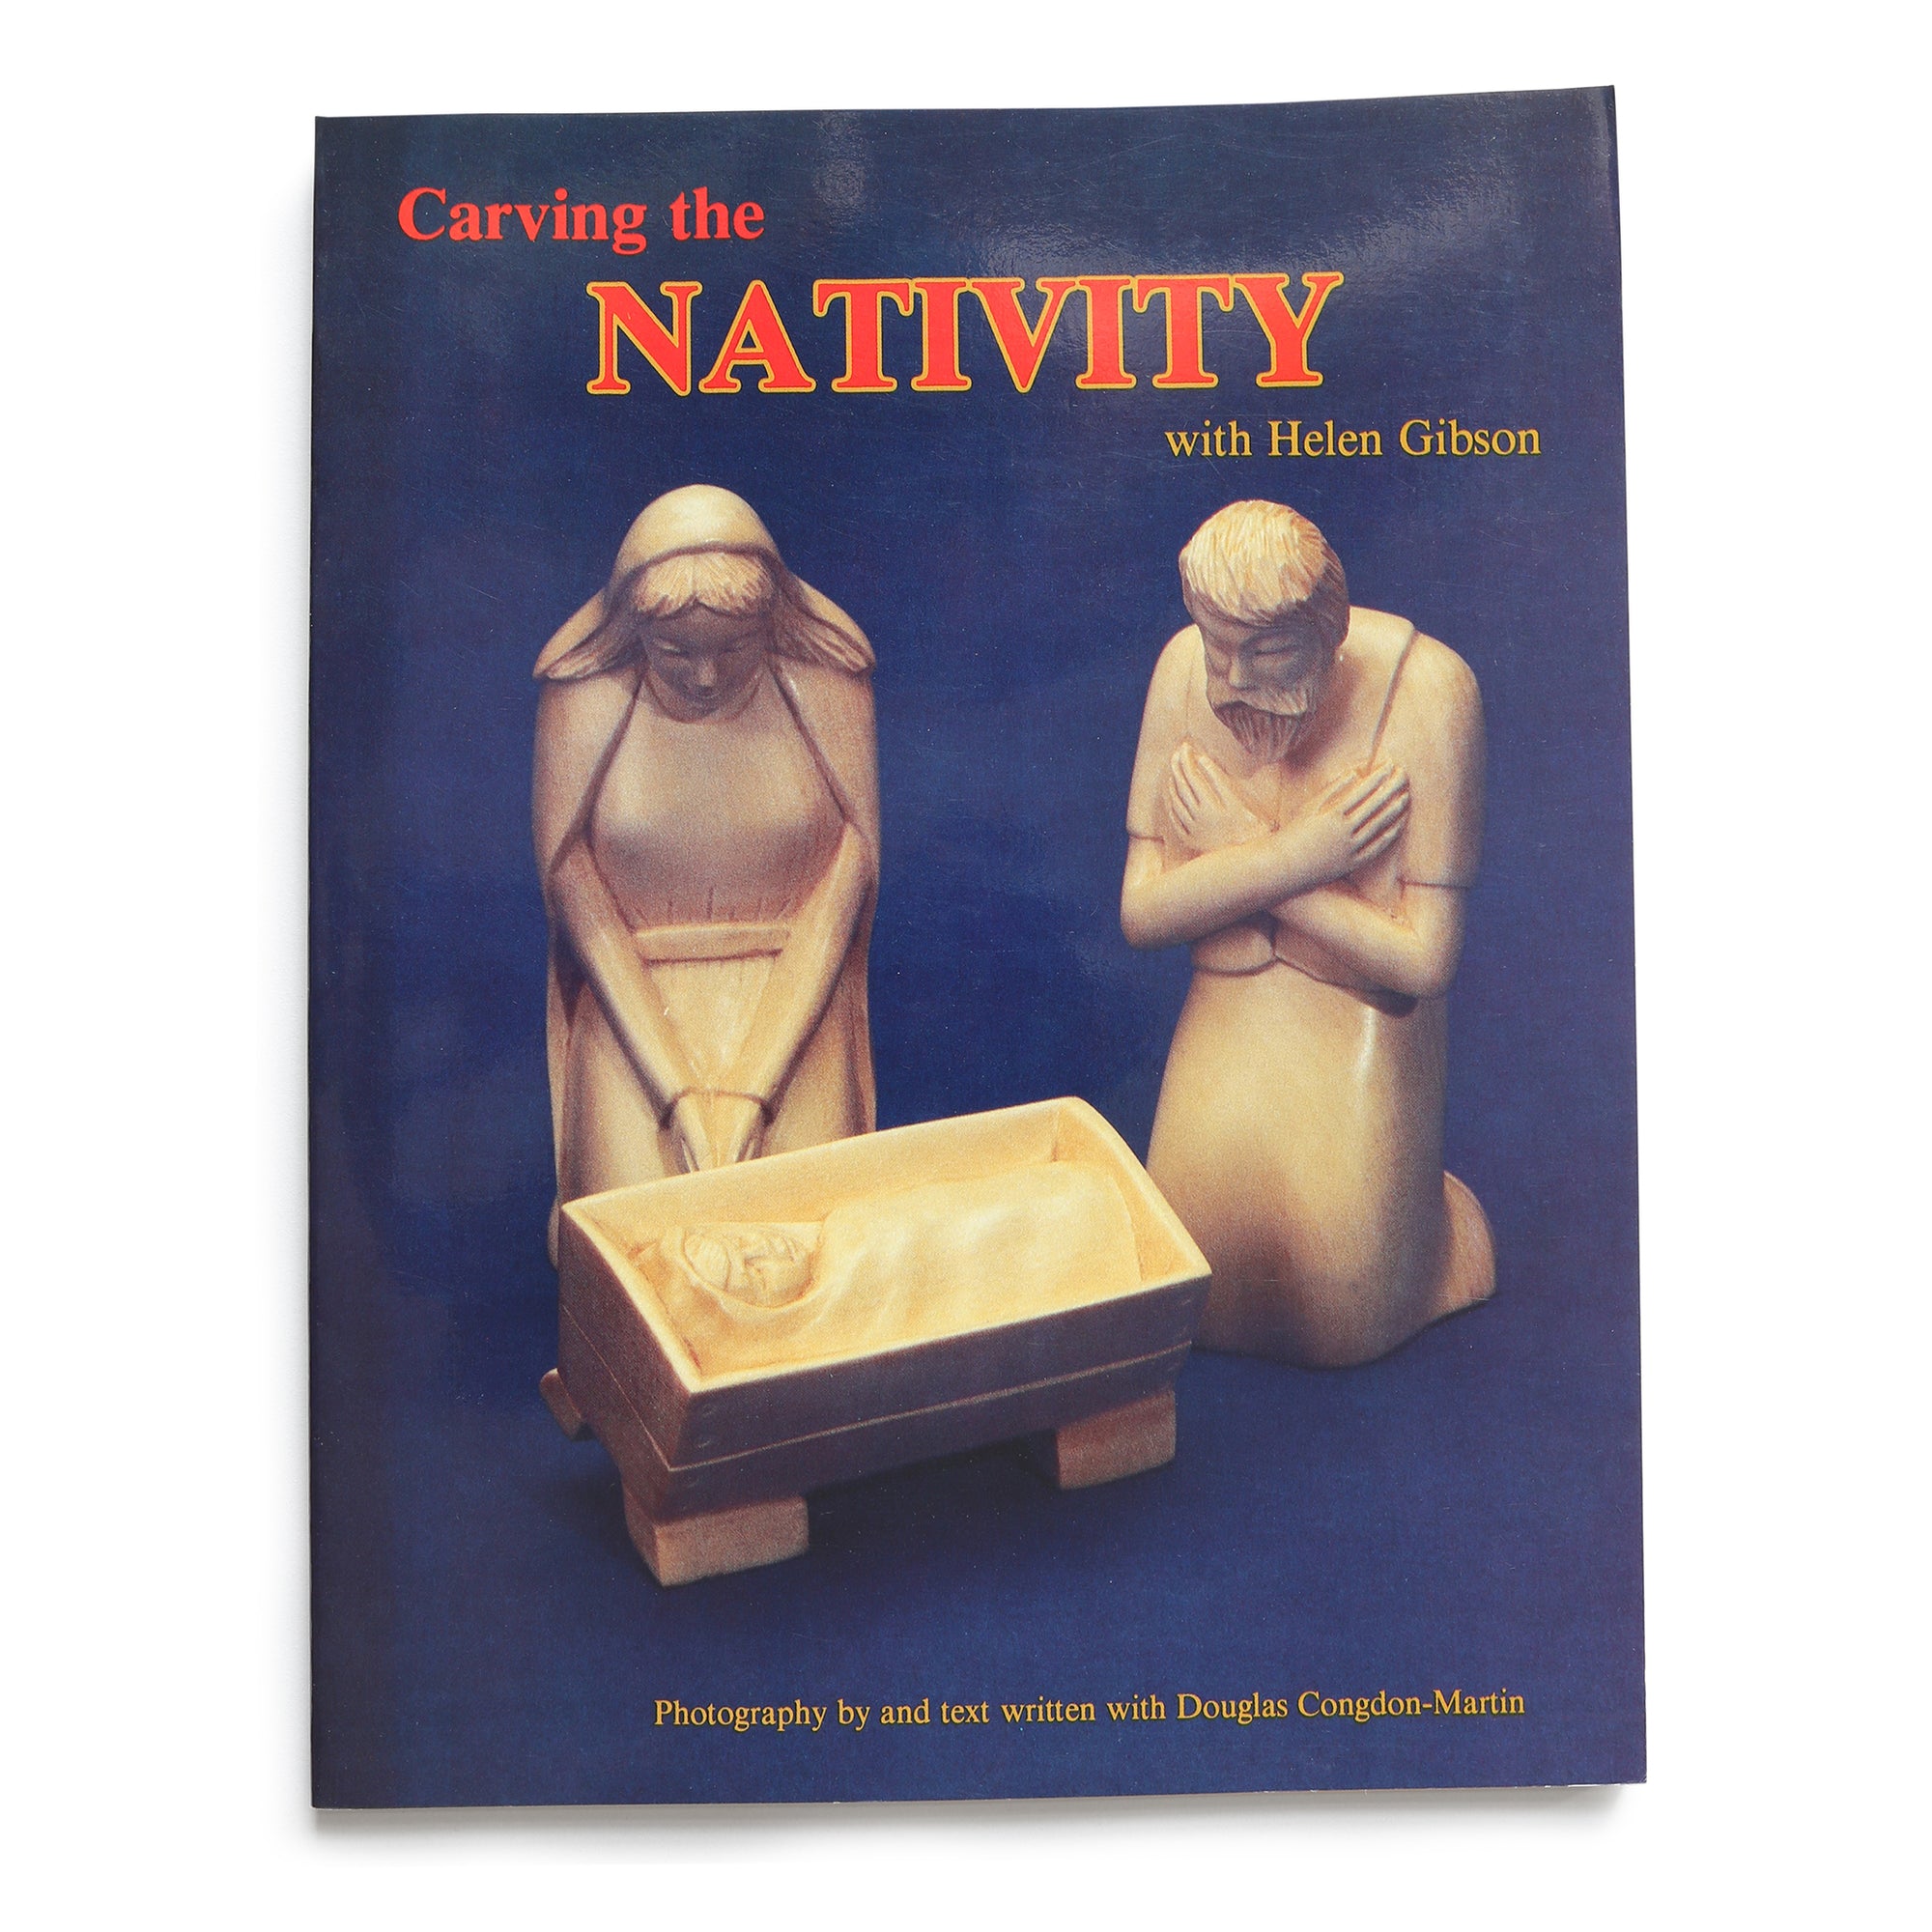 Carving the Nativity